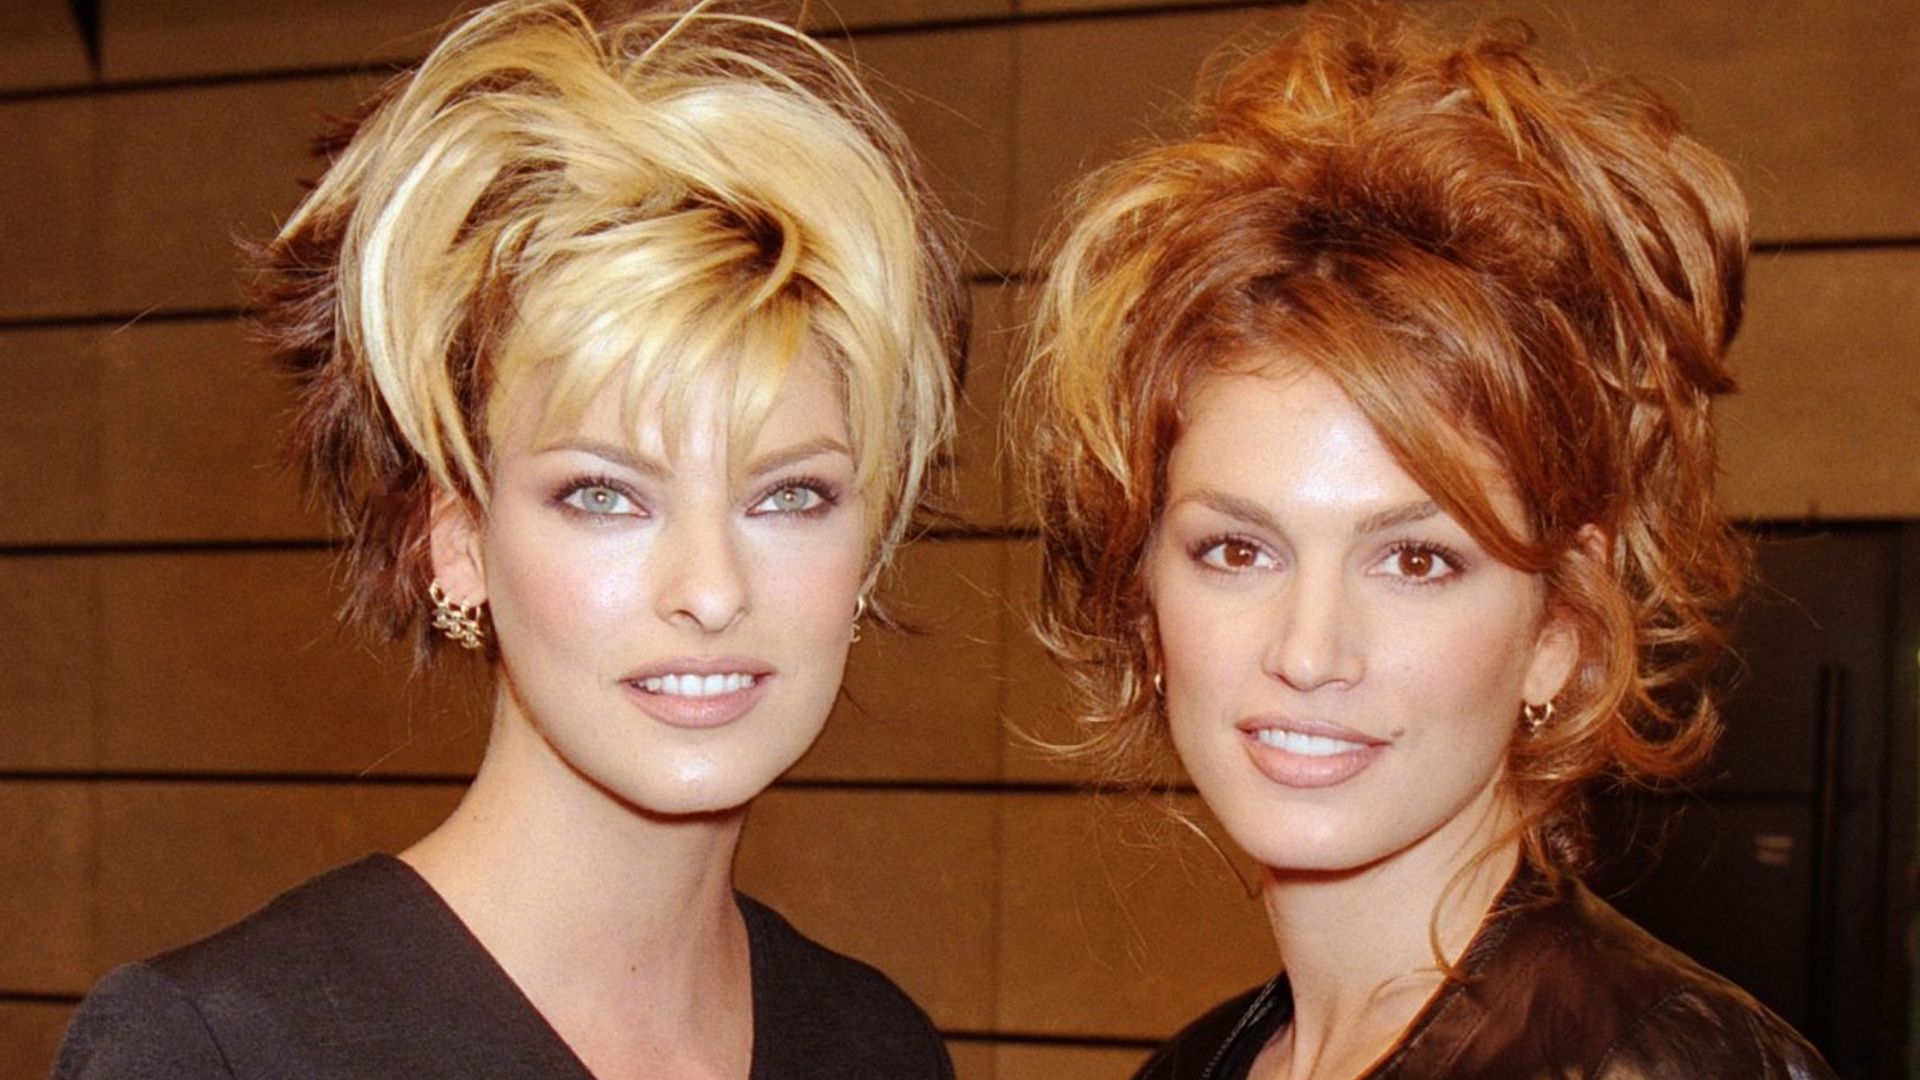 Cindy Crawford, Naomi Campbell share support for Linda Evangelista after heartbreaking health news